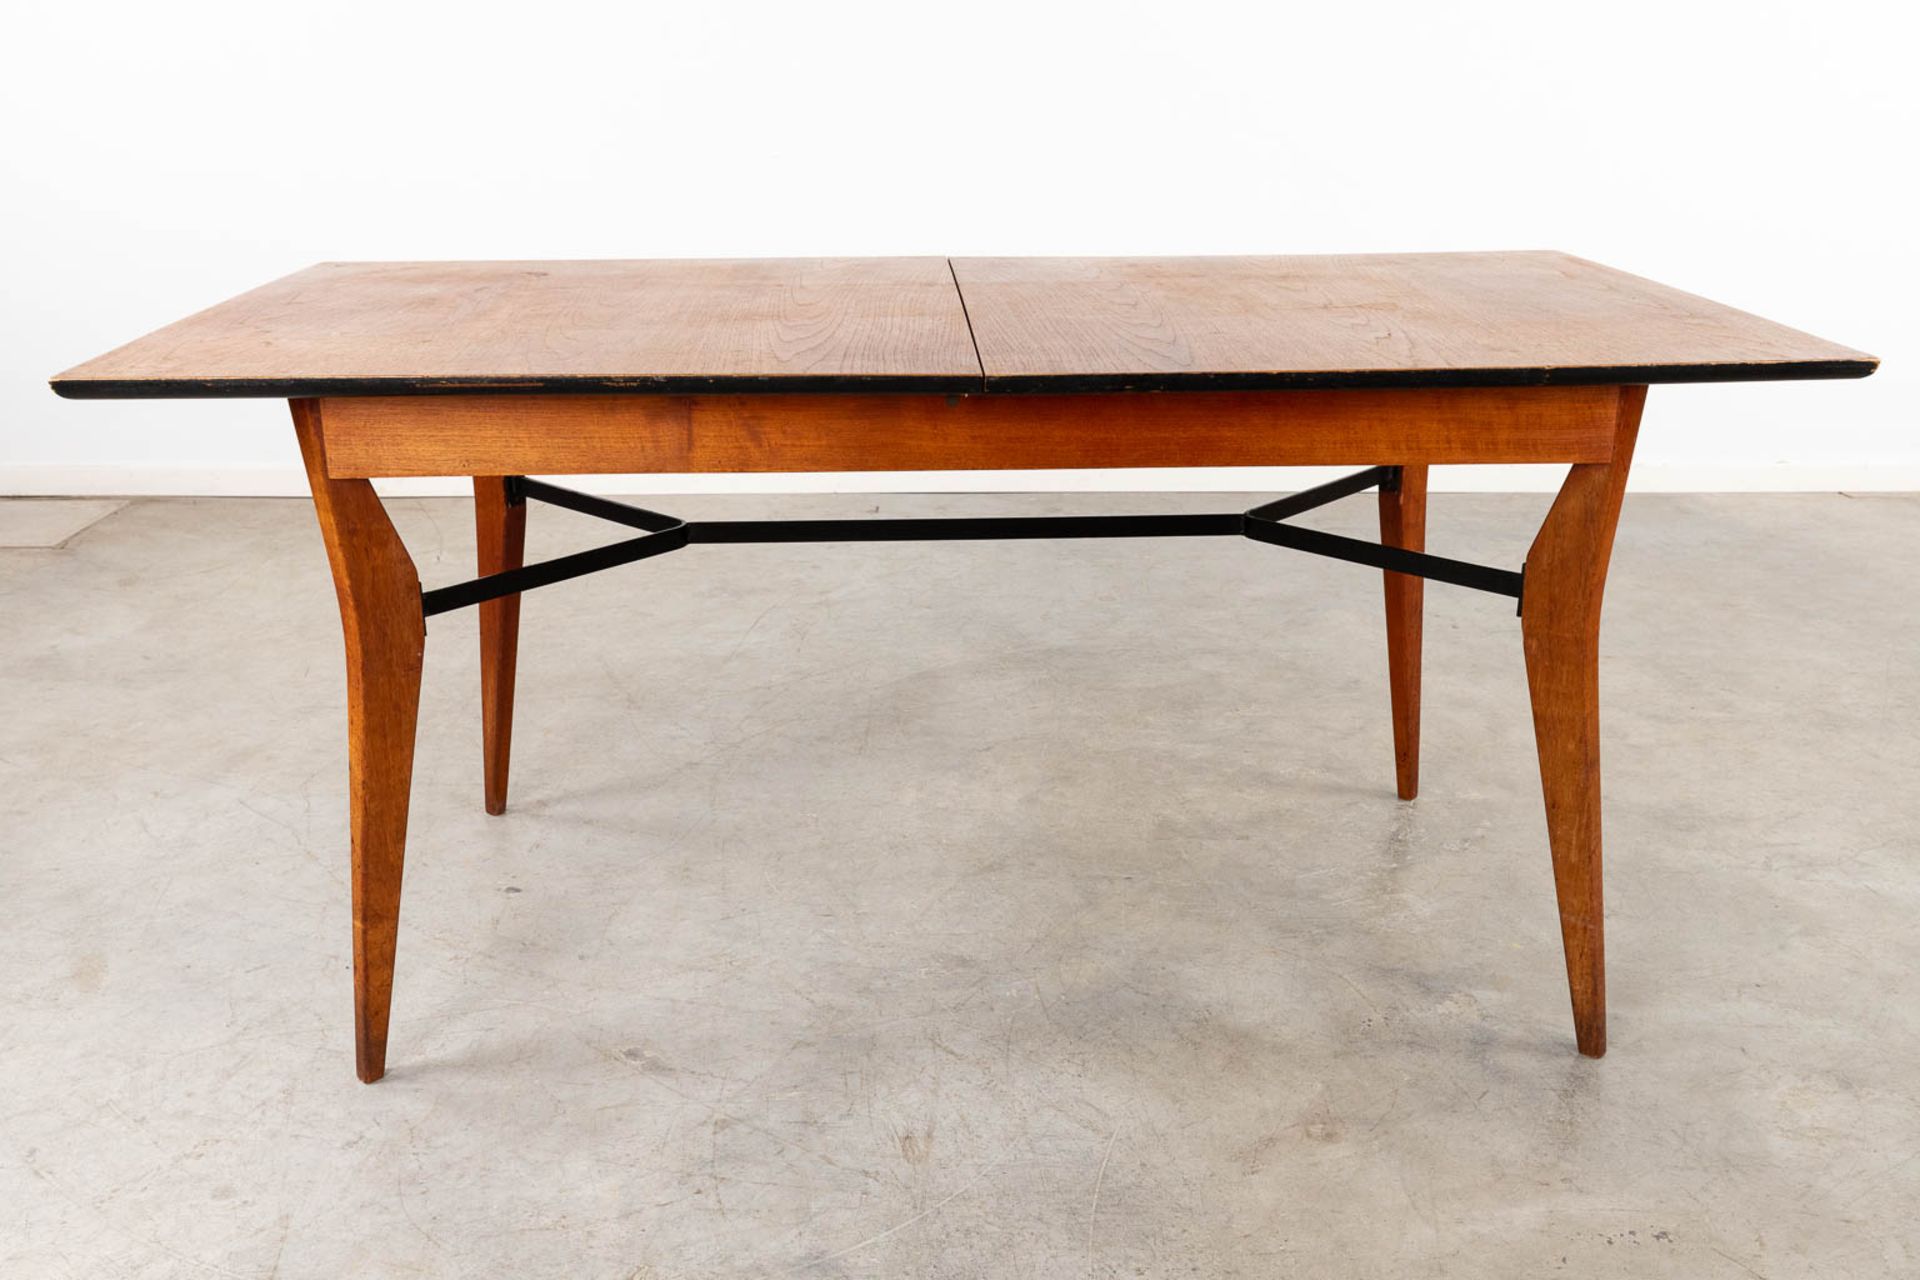 A mid-century table and 6 chairs, rotan and metal, teak wood. Circa 1960. (D:86 x W:160 x H:76 cm) - Image 13 of 31